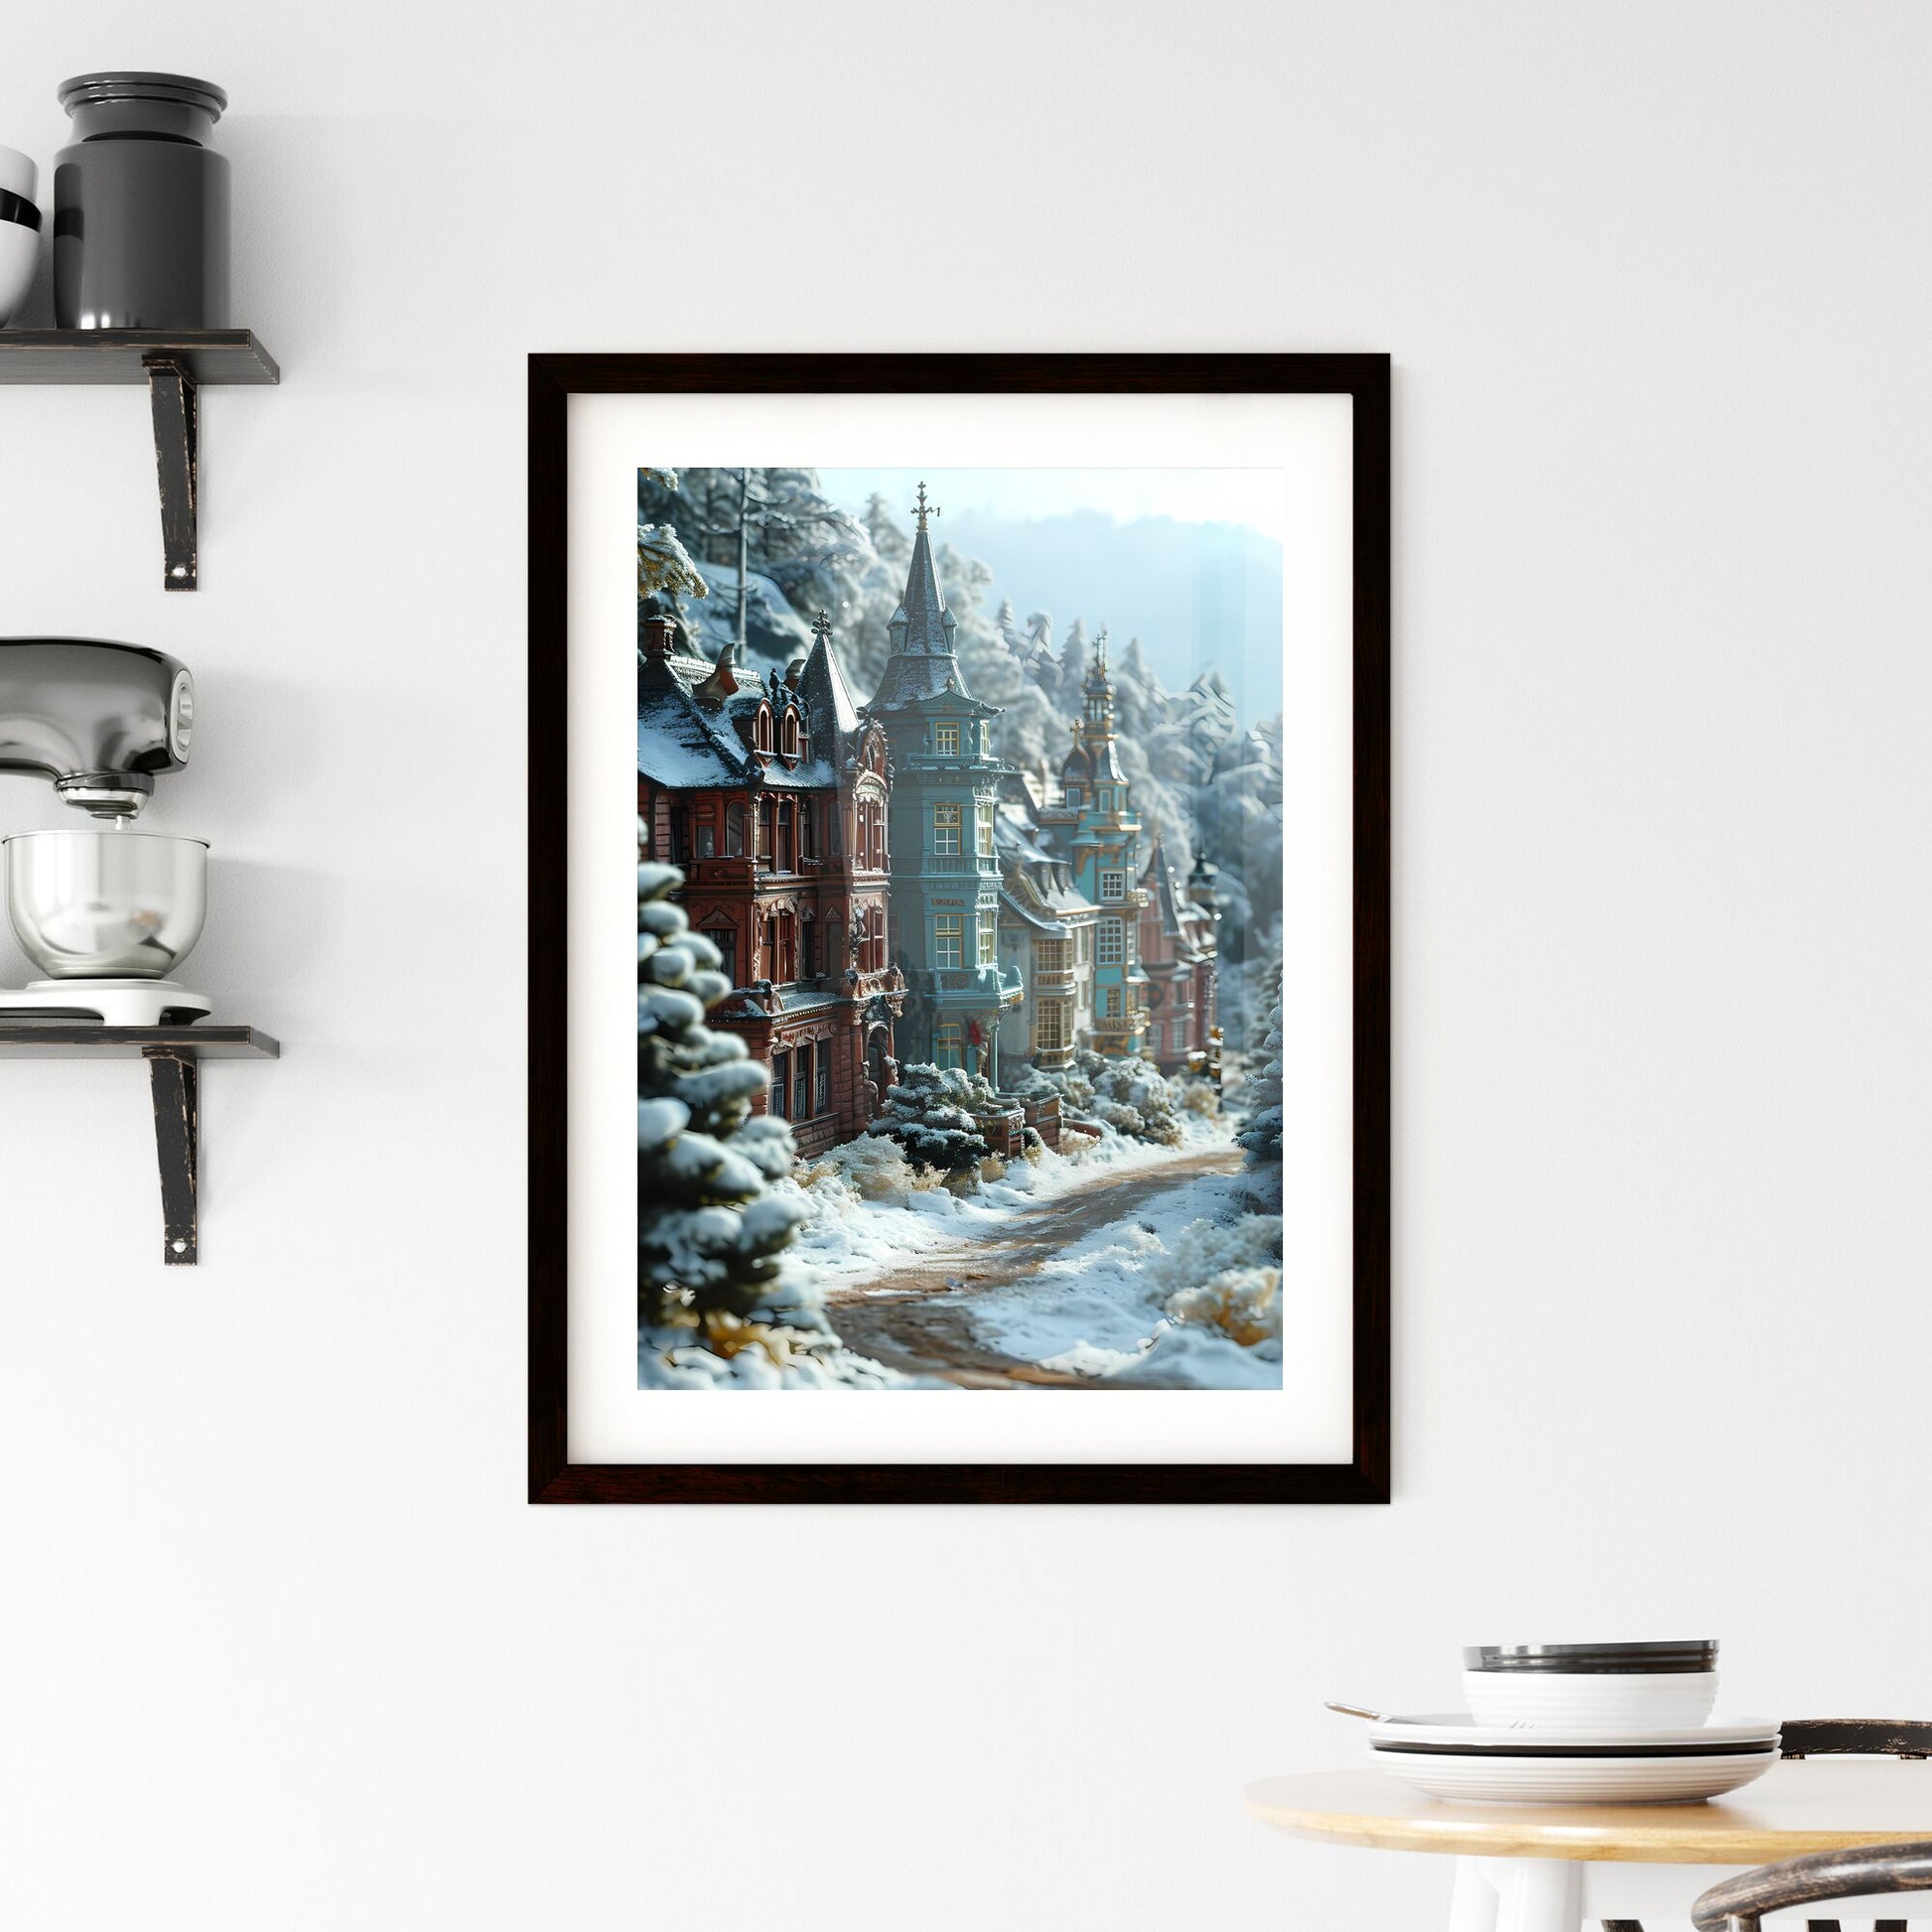 A Poster of a micro landscape of a City in fairy tales - A Row Of Houses In A Snowy Forest Default Title